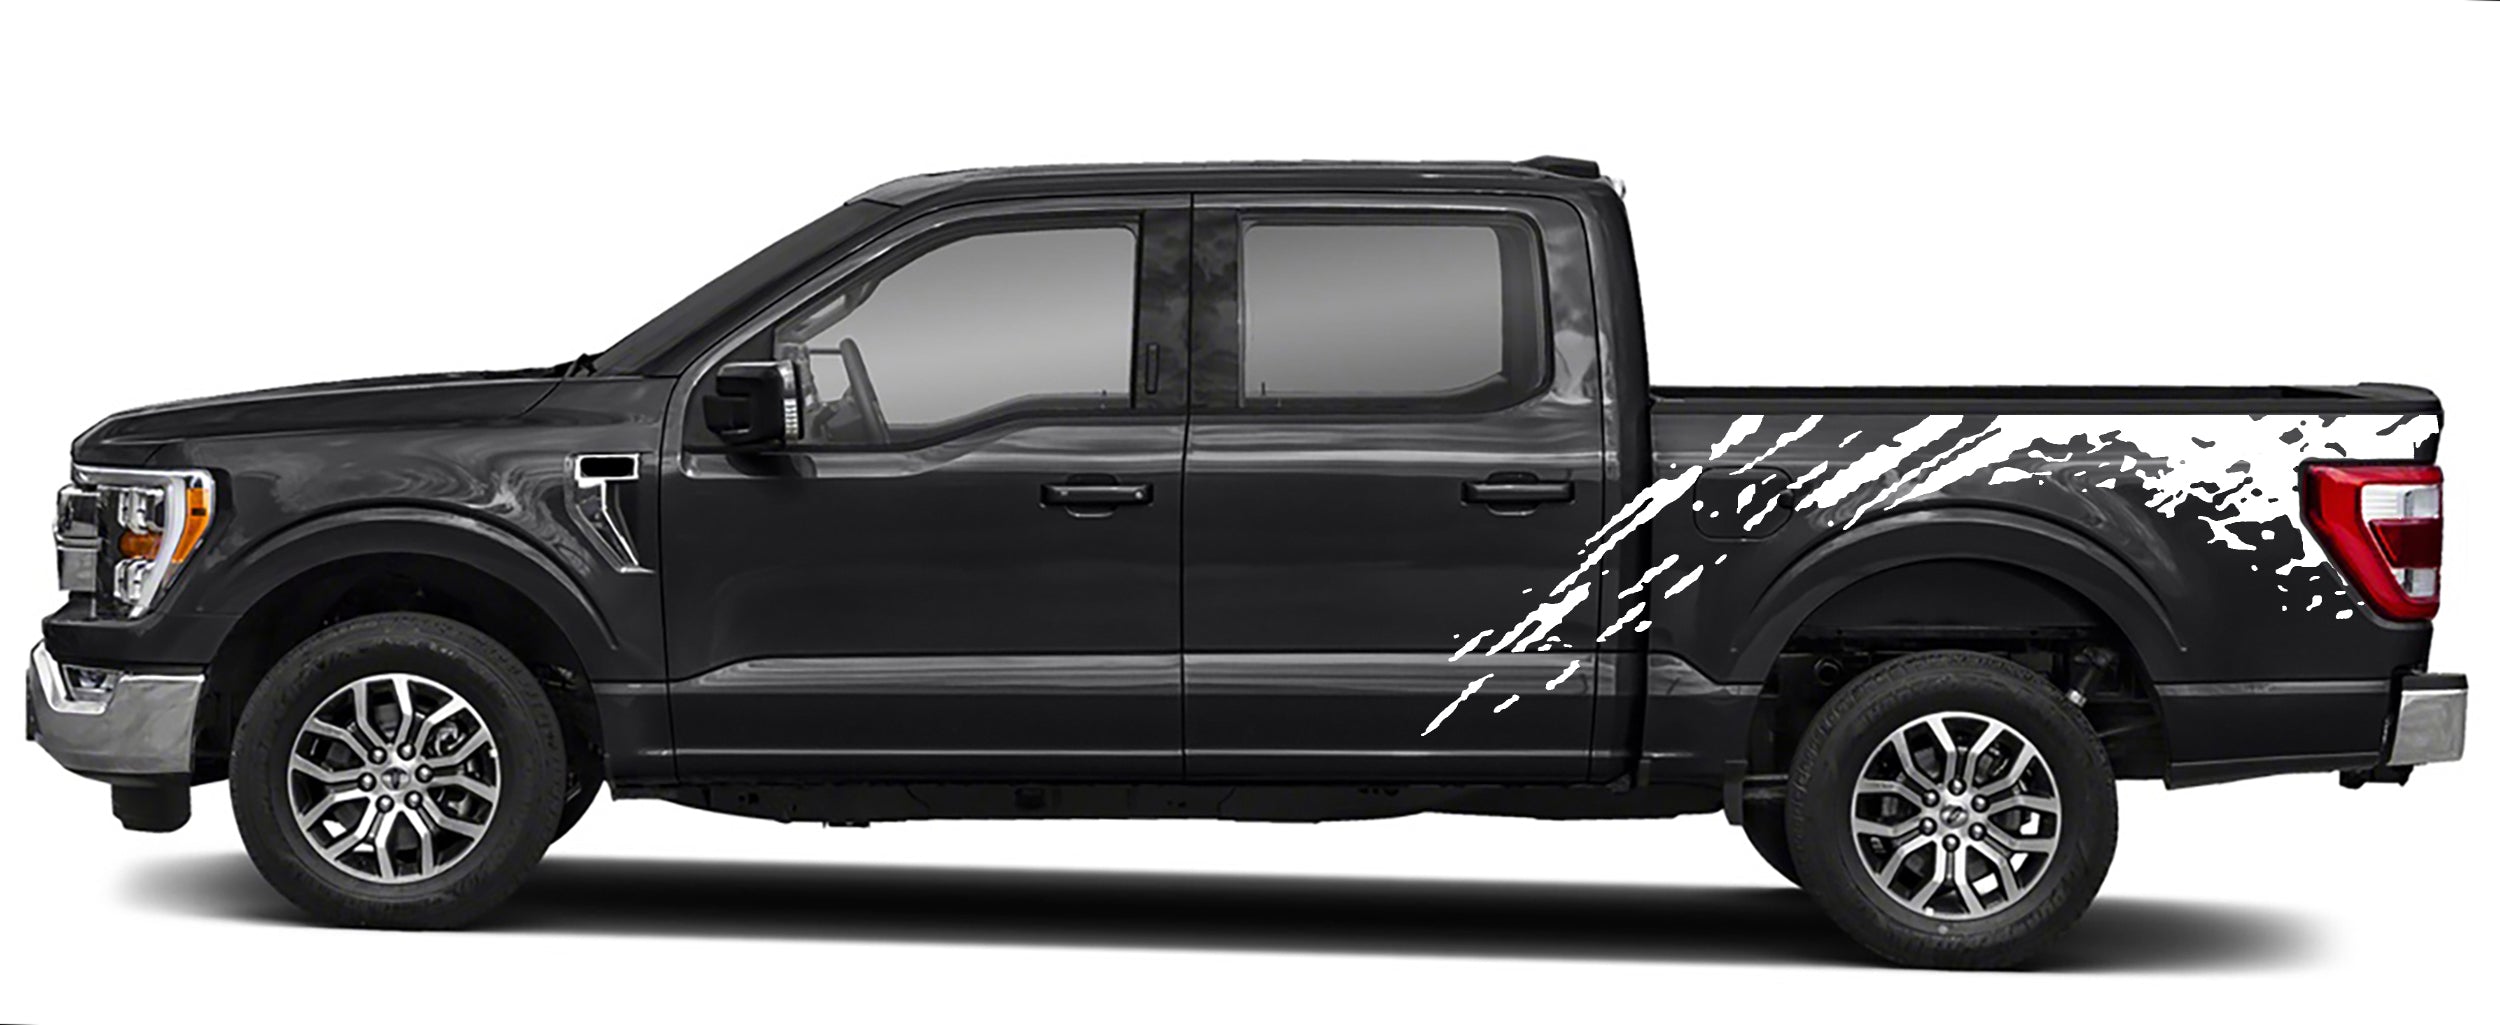 mud splash bed graphics for ford f 150 2021 to 2023 models white